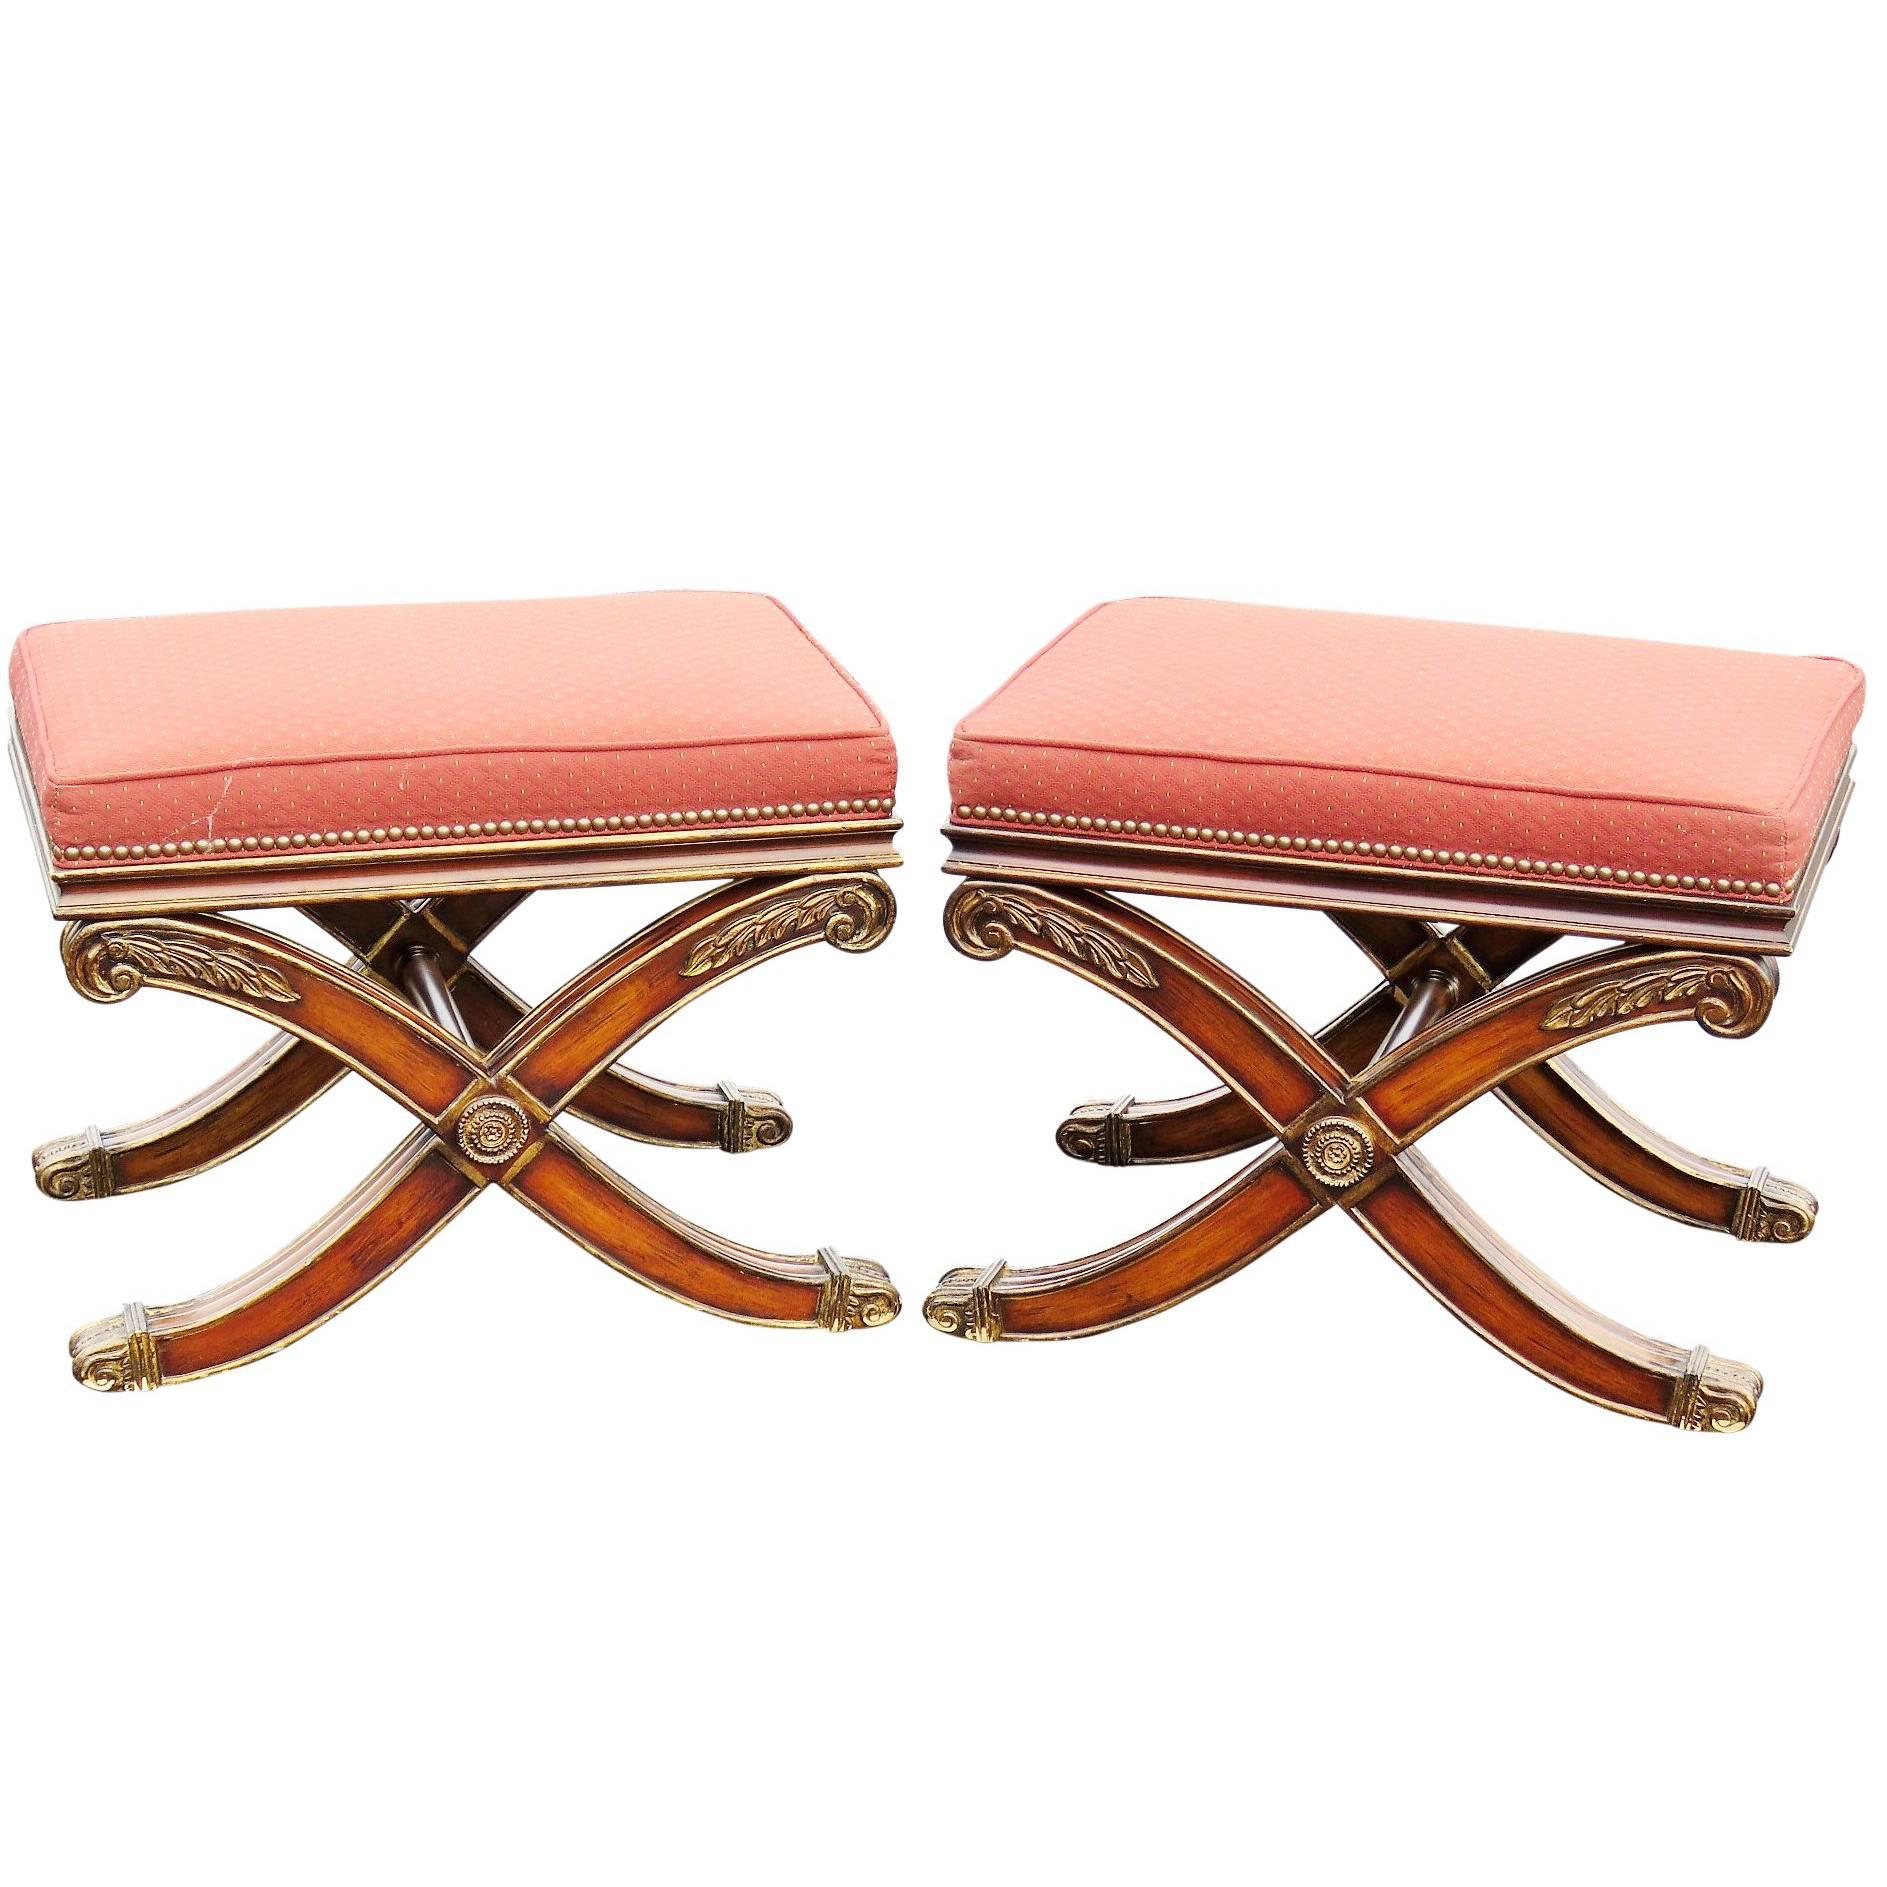 Pair of Regency Style Upholstered X-Benches